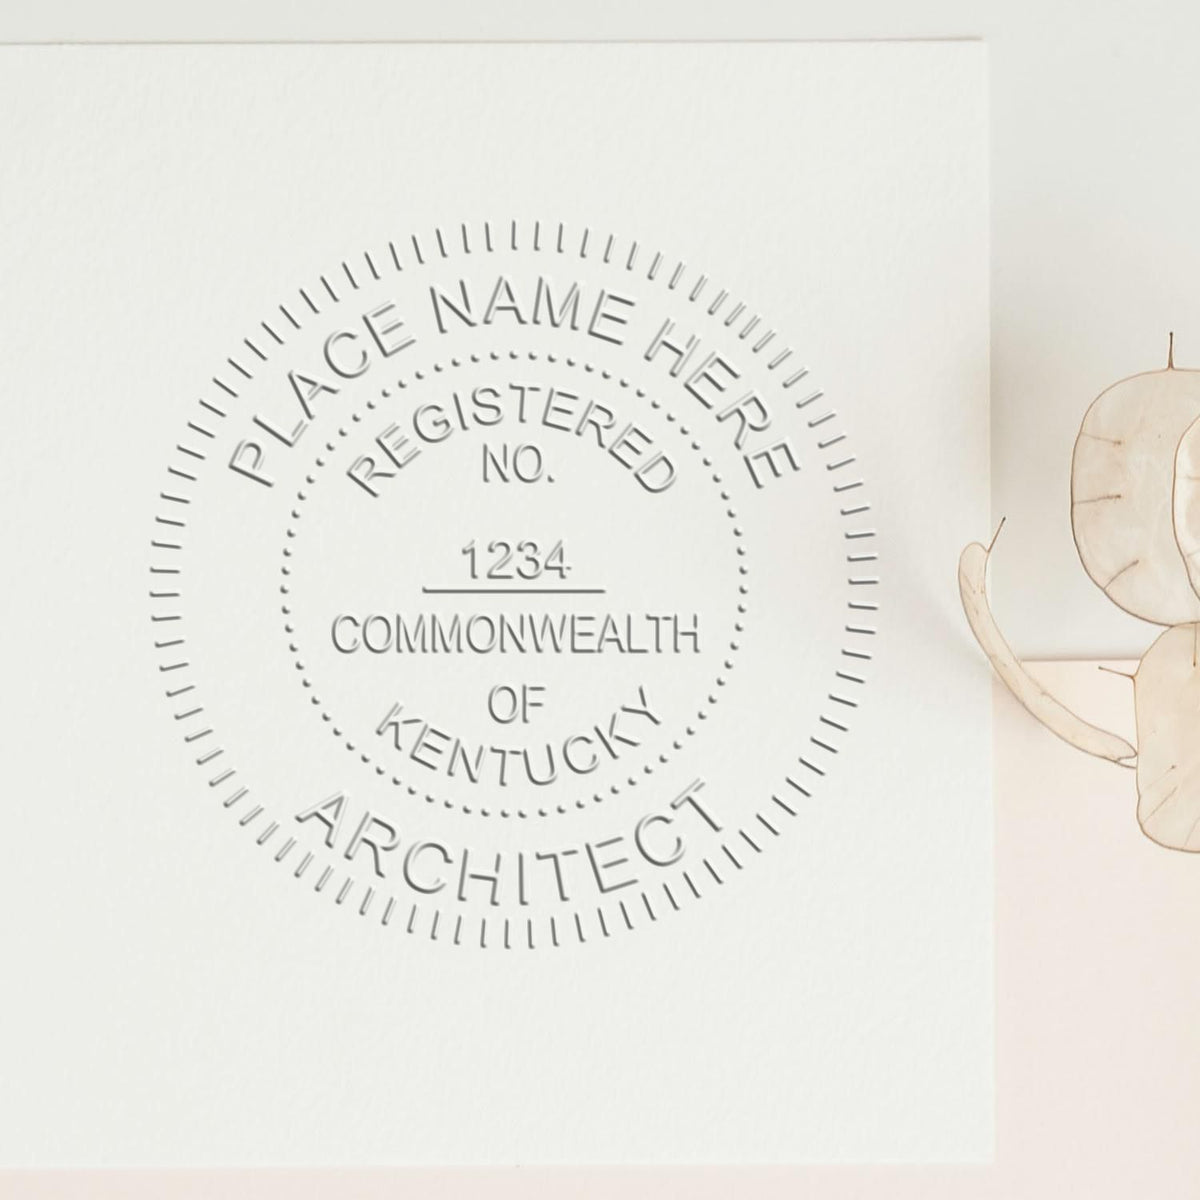 An alternative view of the State of Kentucky Long Reach Architectural Embossing Seal stamped on a sheet of paper showing the image in use